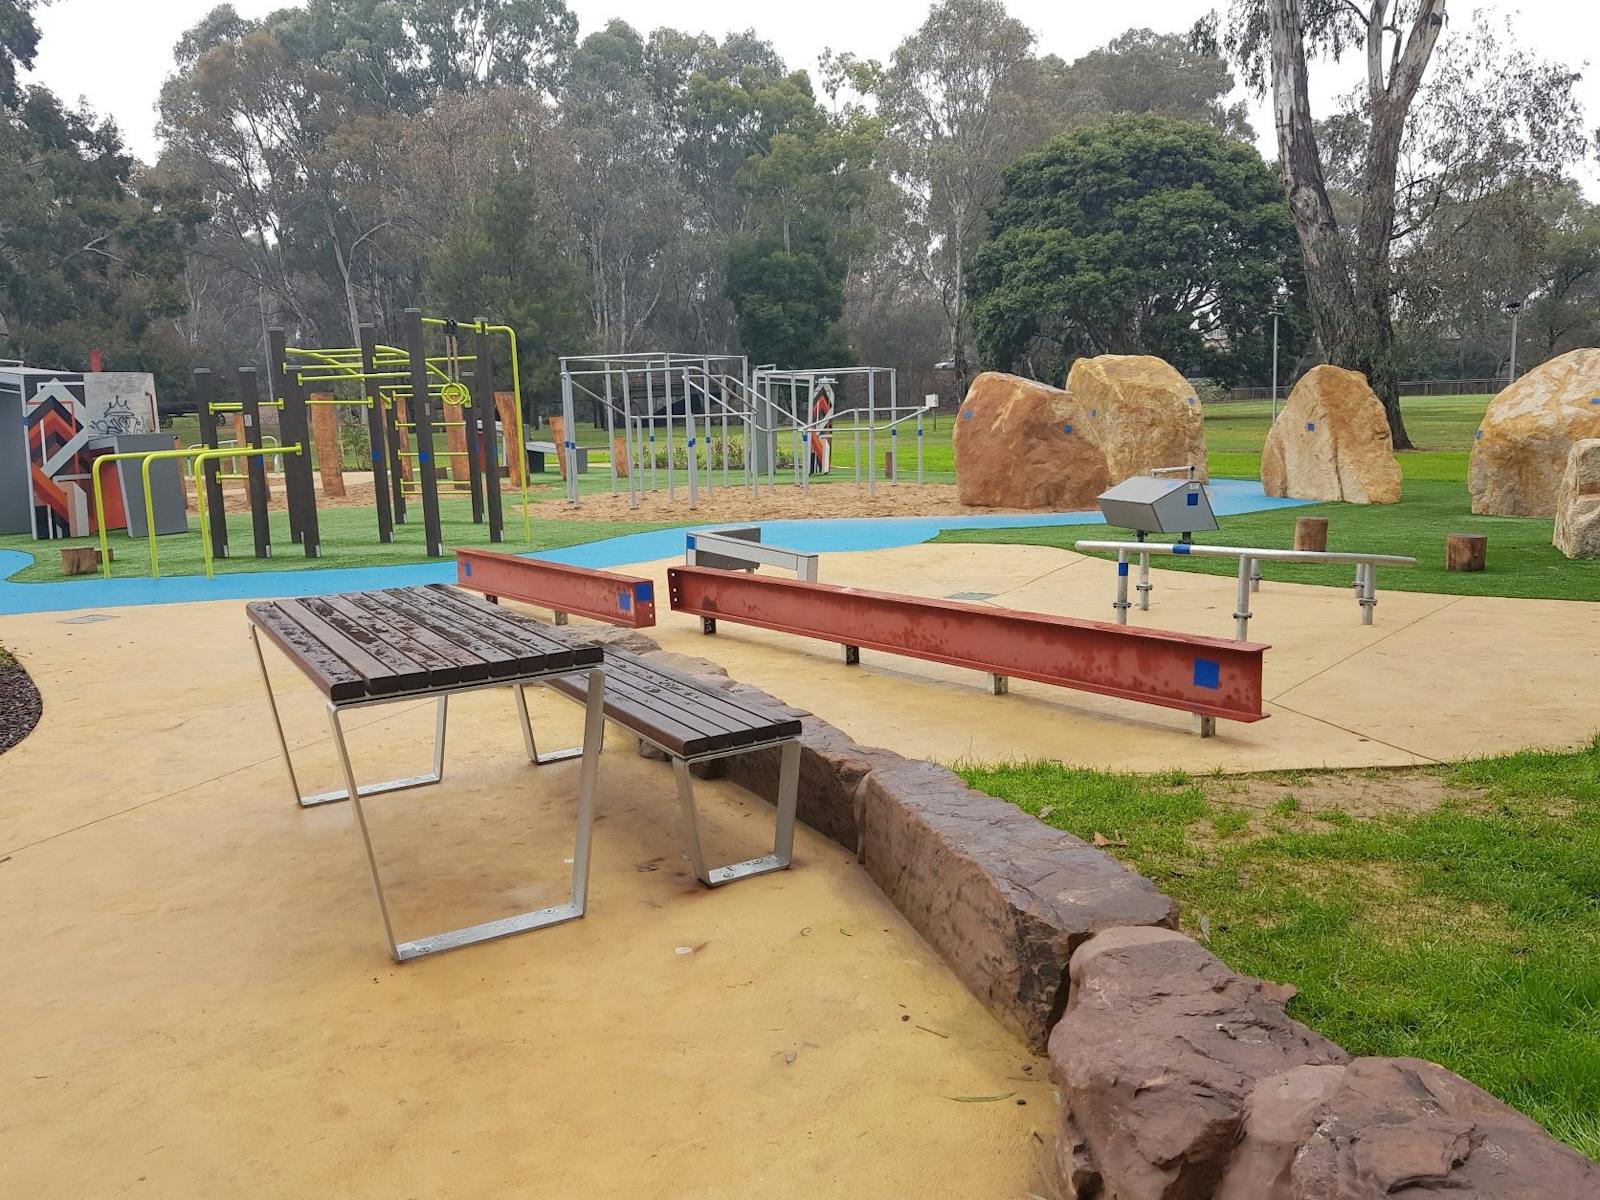 Table and seat, beam structures for climbing, rocks, path, more climbing structures, parkland, trees